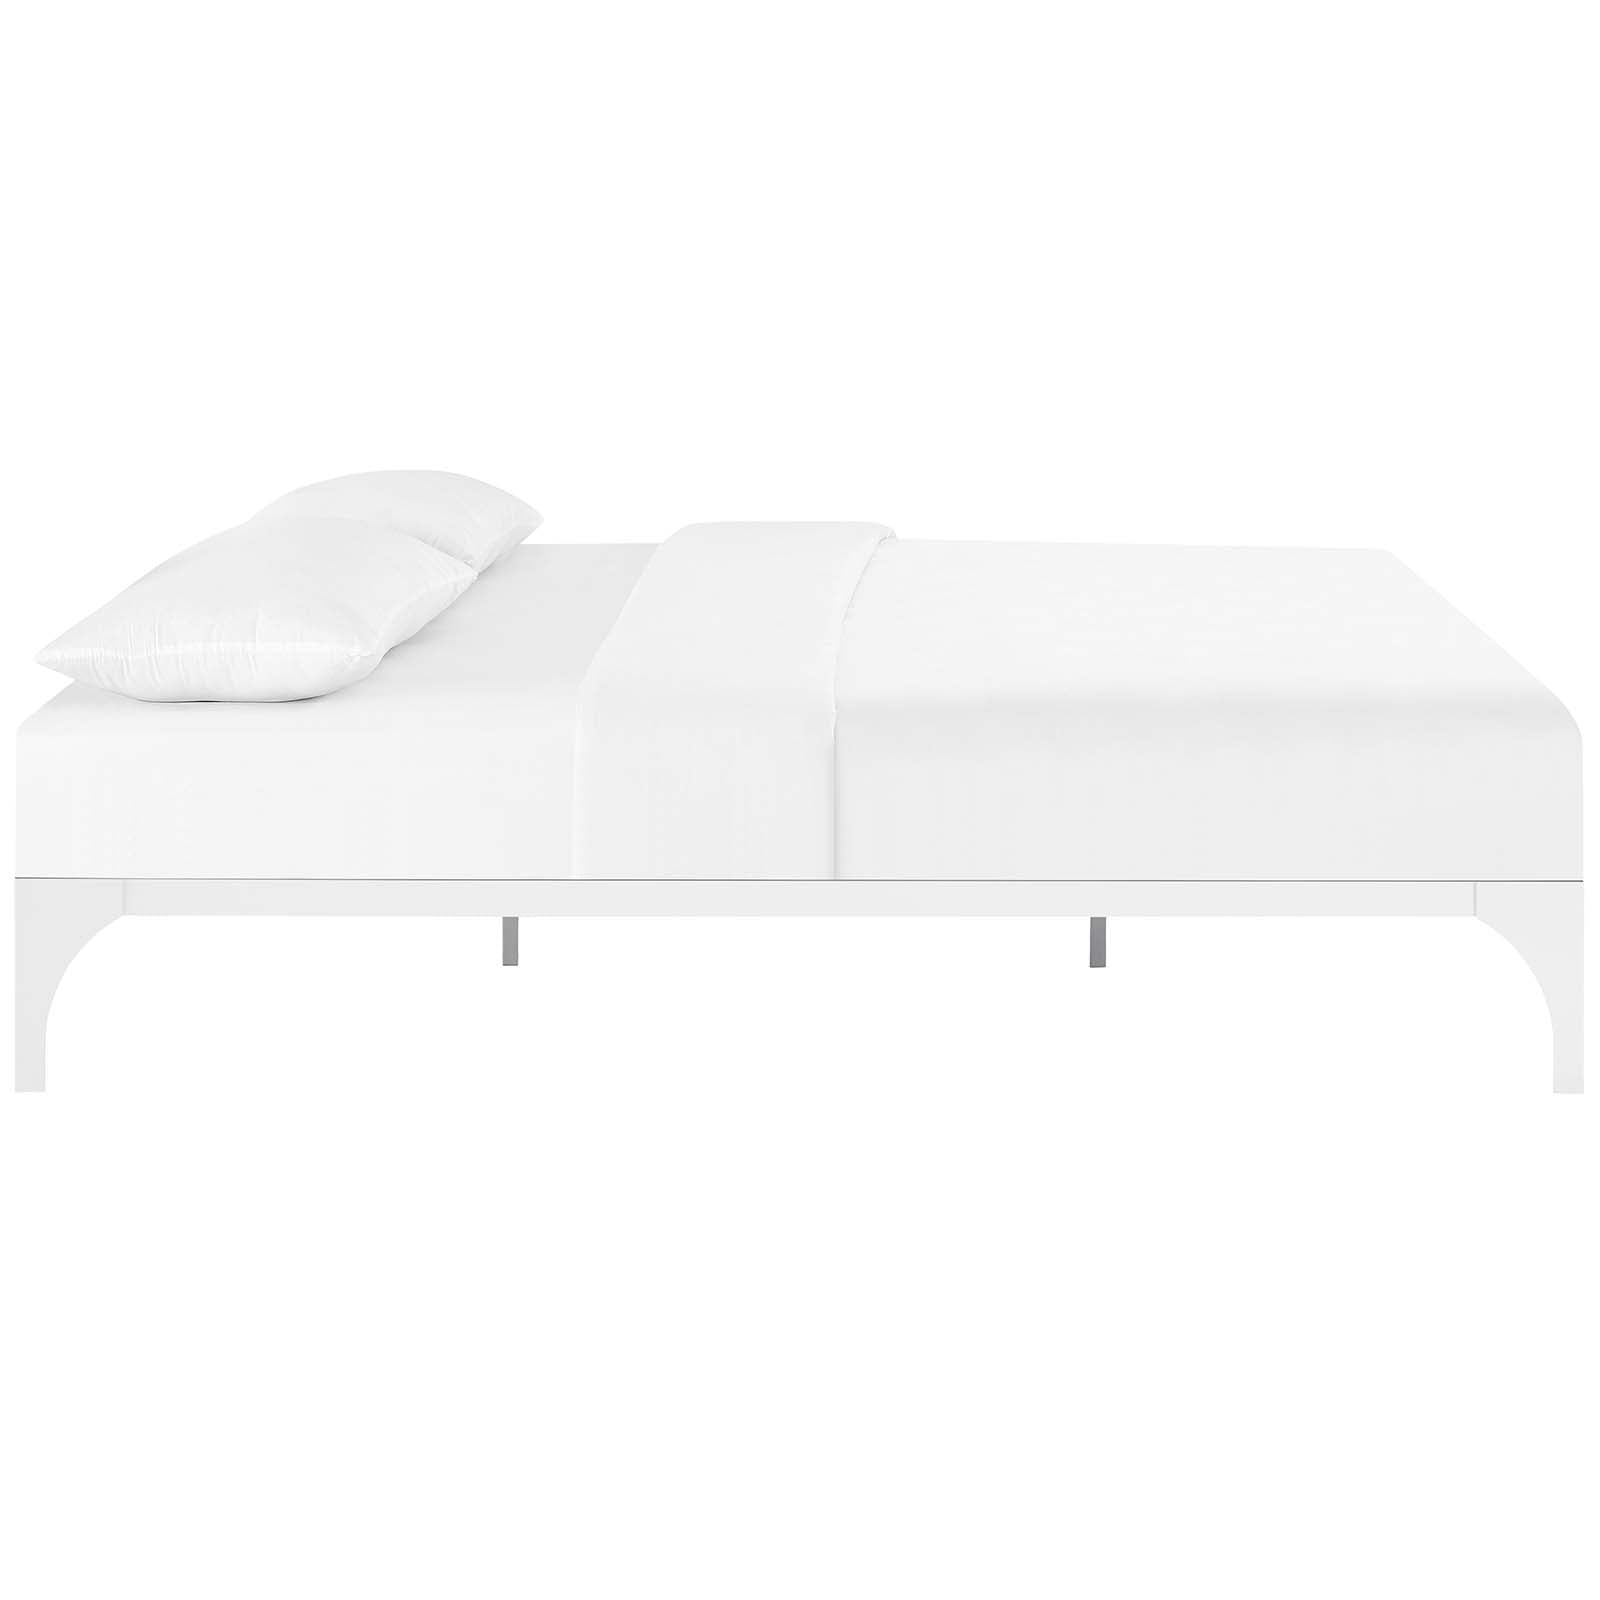 Modway Beds - Ollie King Bed Frame White